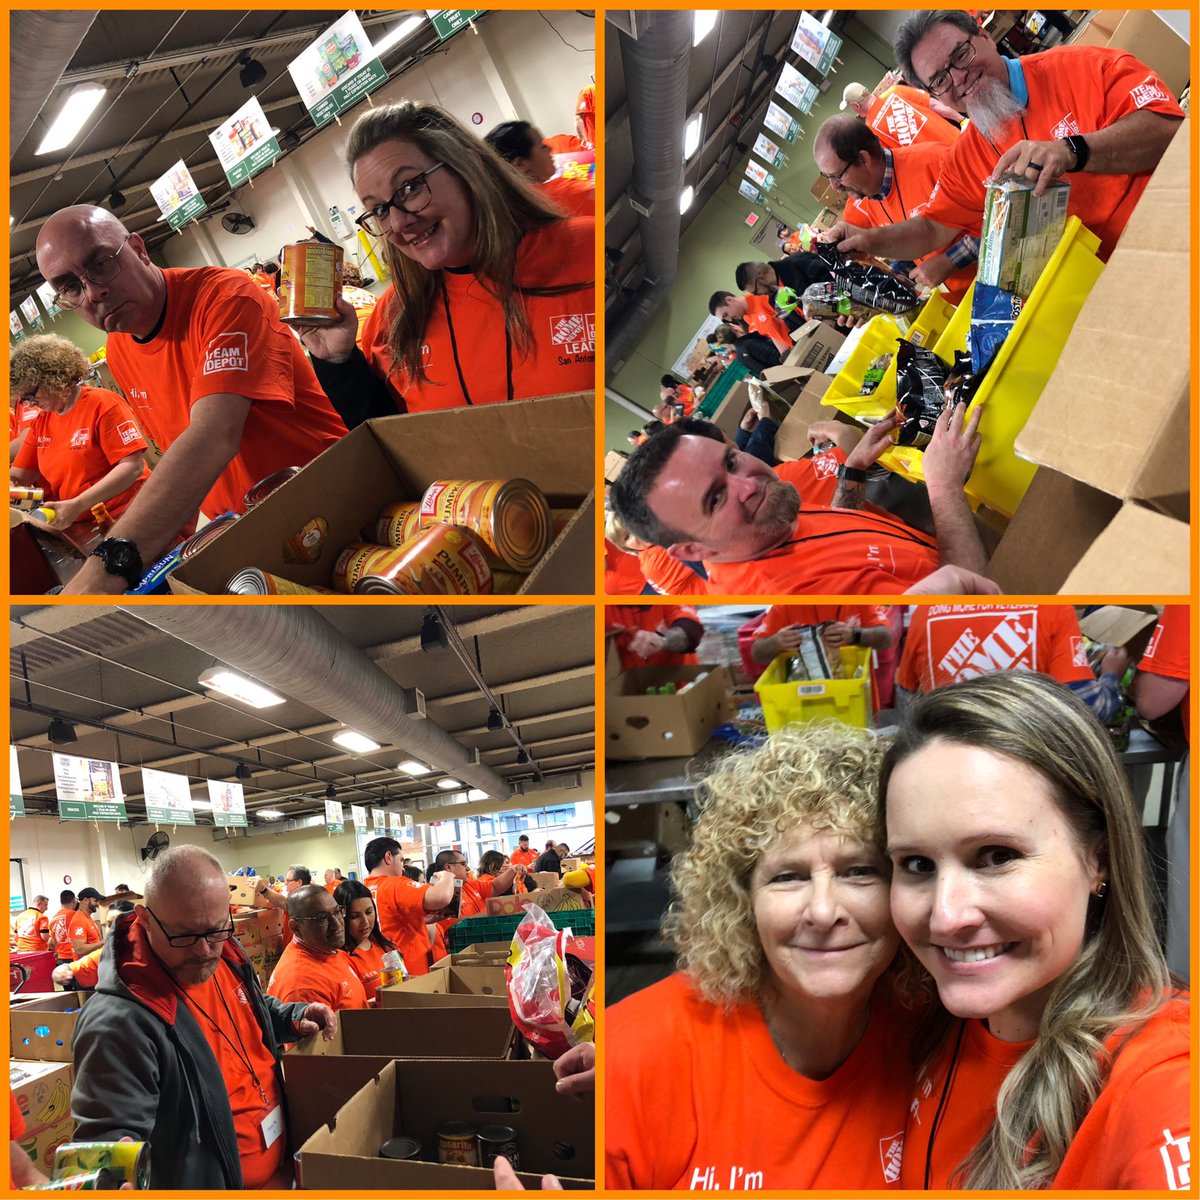 SA Market having a GREAT day Giving back!! #THDGULFGIVES #SpringIntoService #motherdaughterbonding